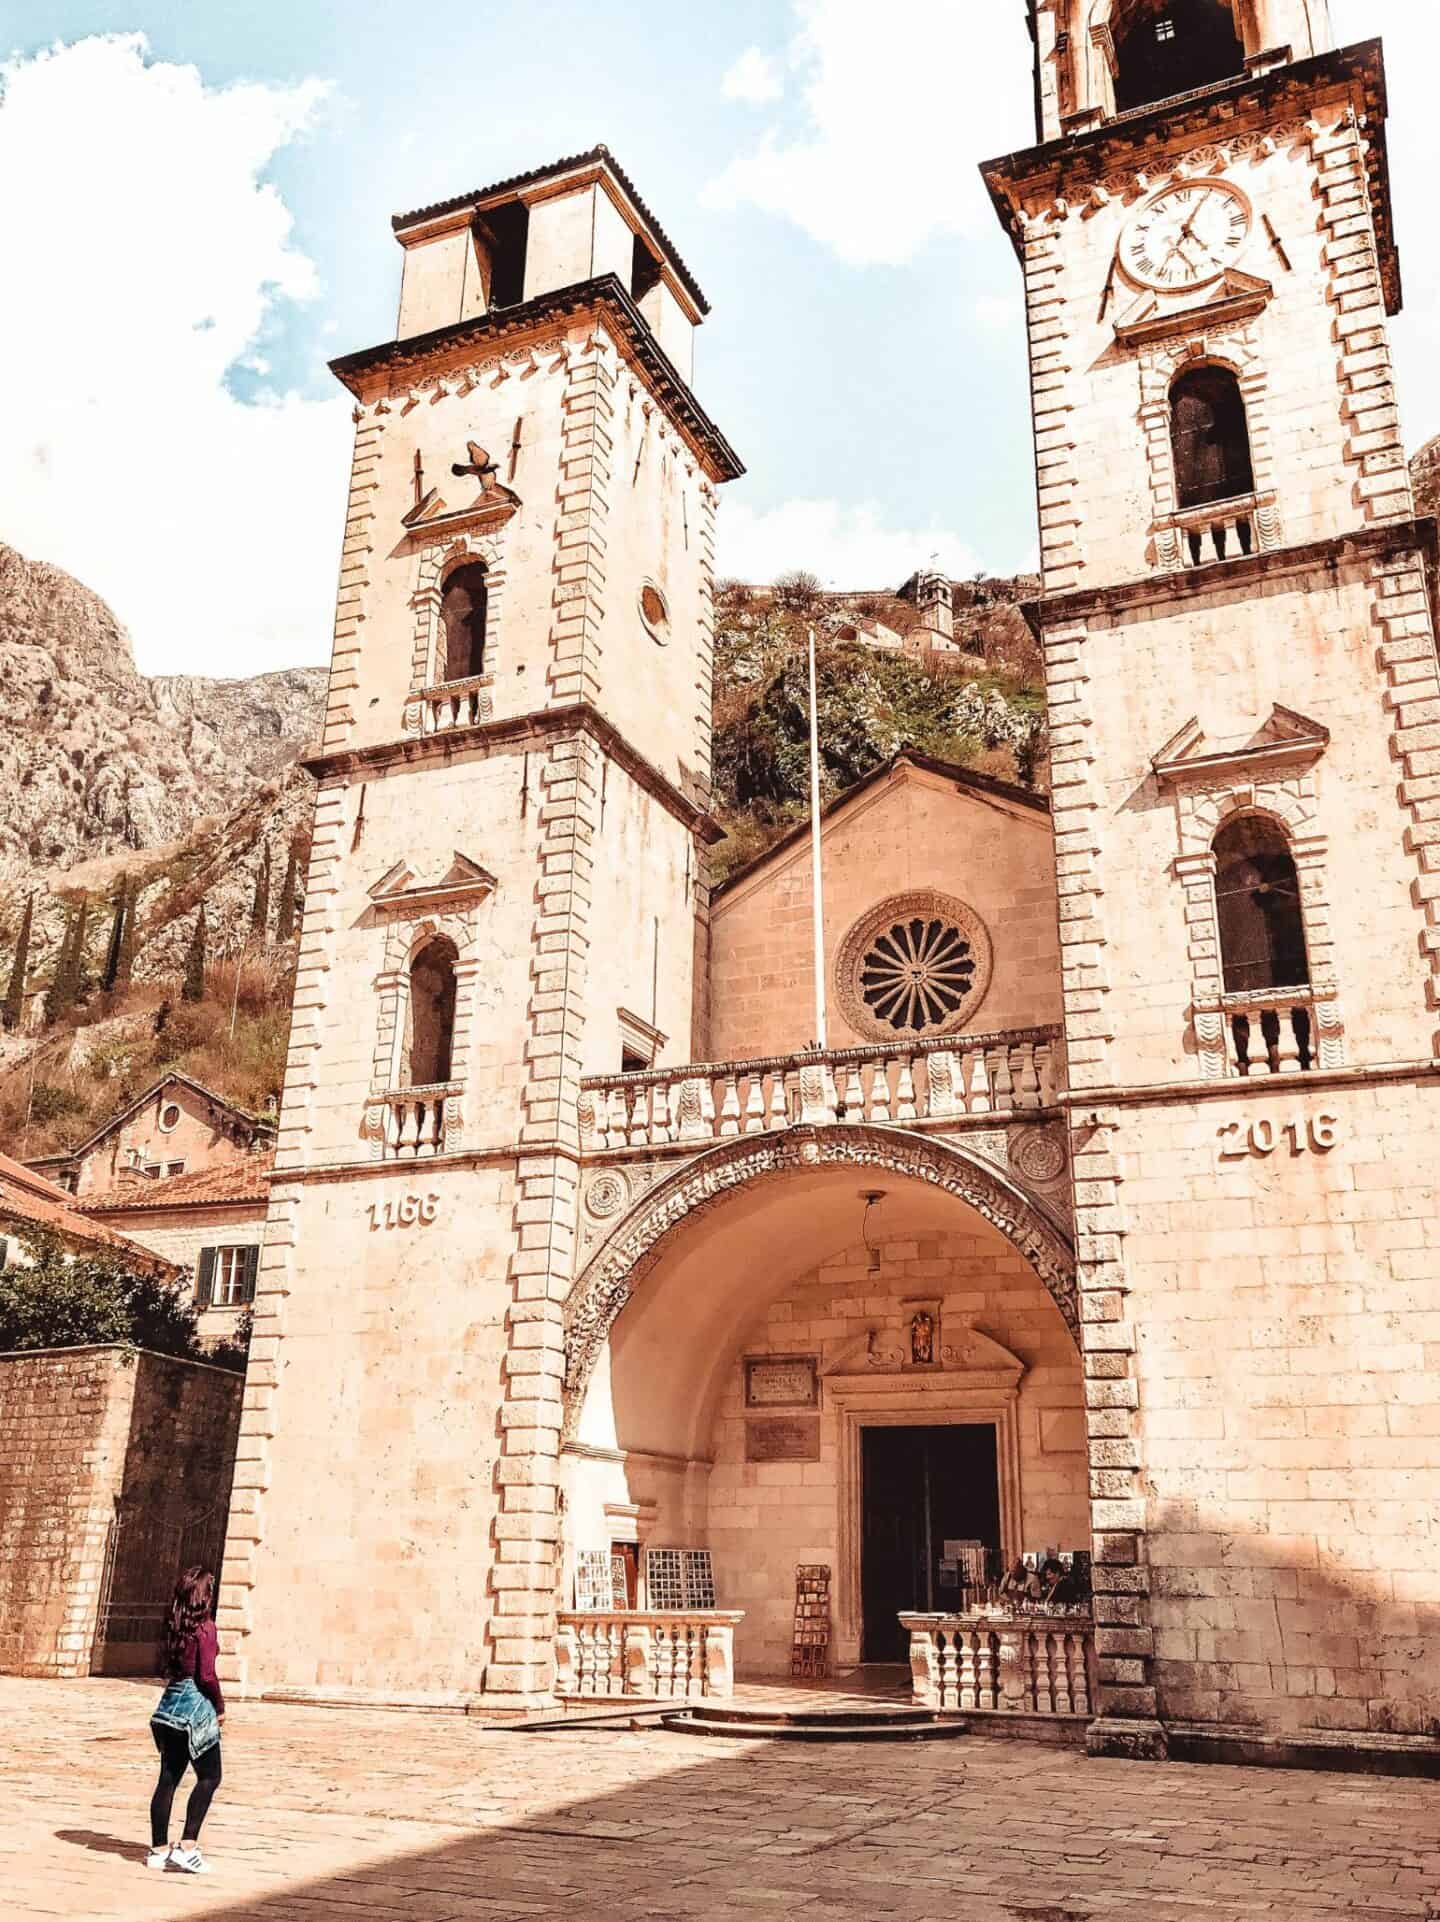 Blog post for a day trip to the Bay of Kotor